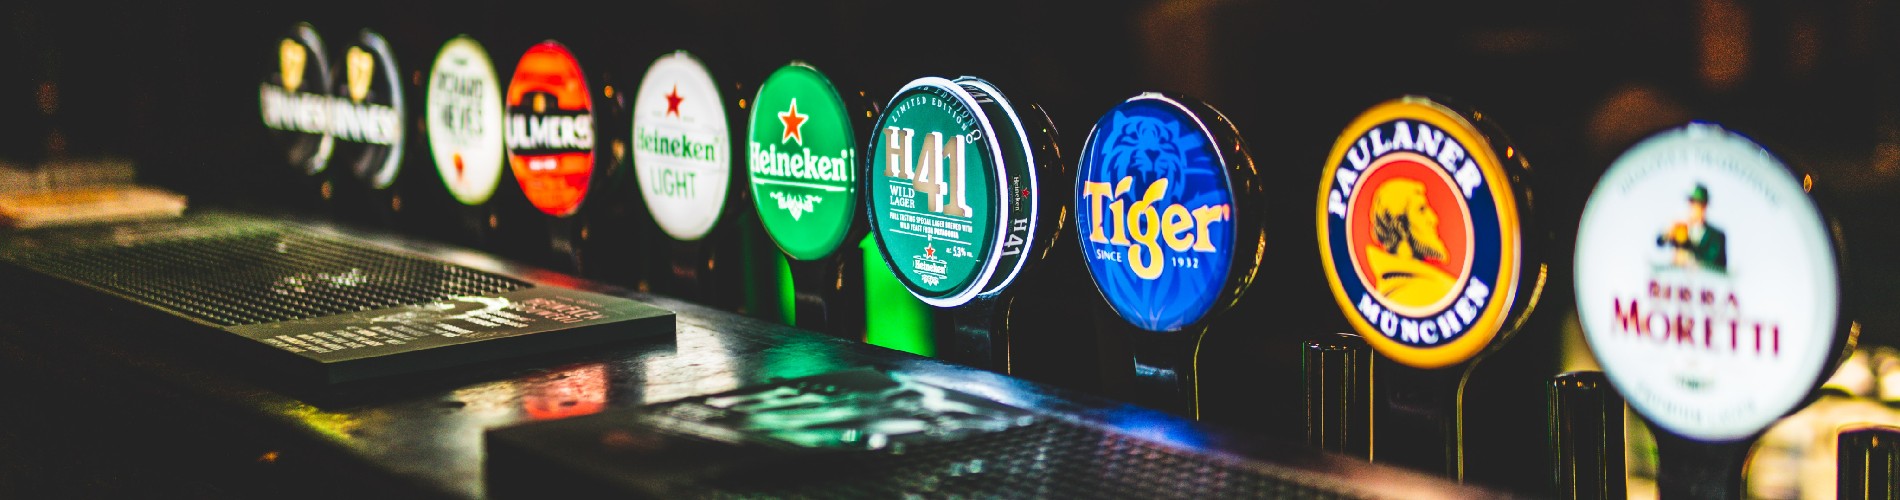 A row of beer taps in a pub with the logos facing the camera